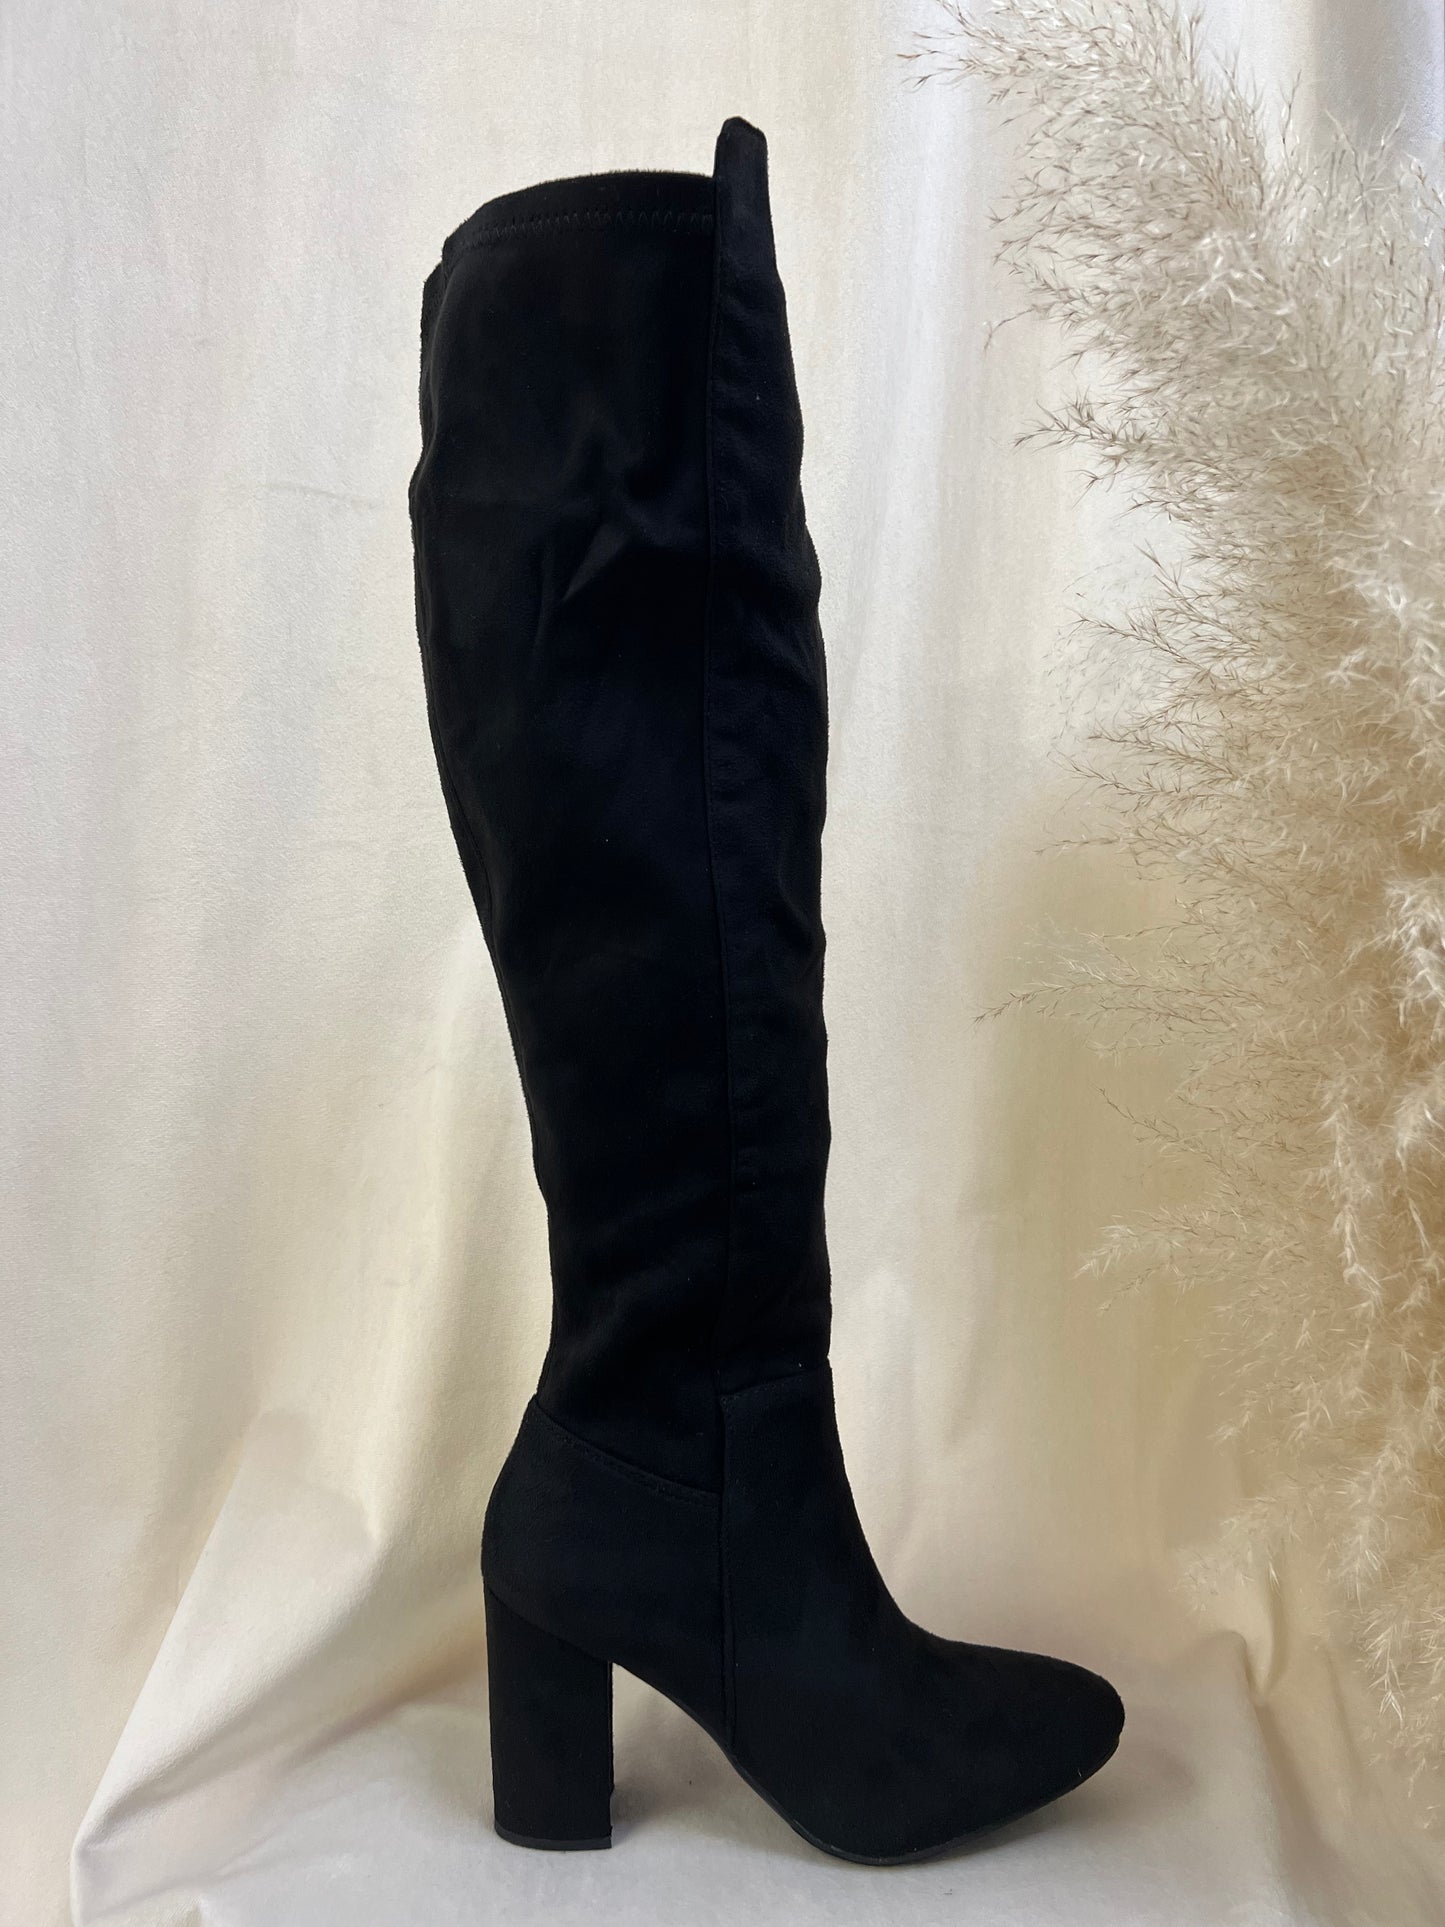 NEW NORTH KNEE HIGH BOOTS